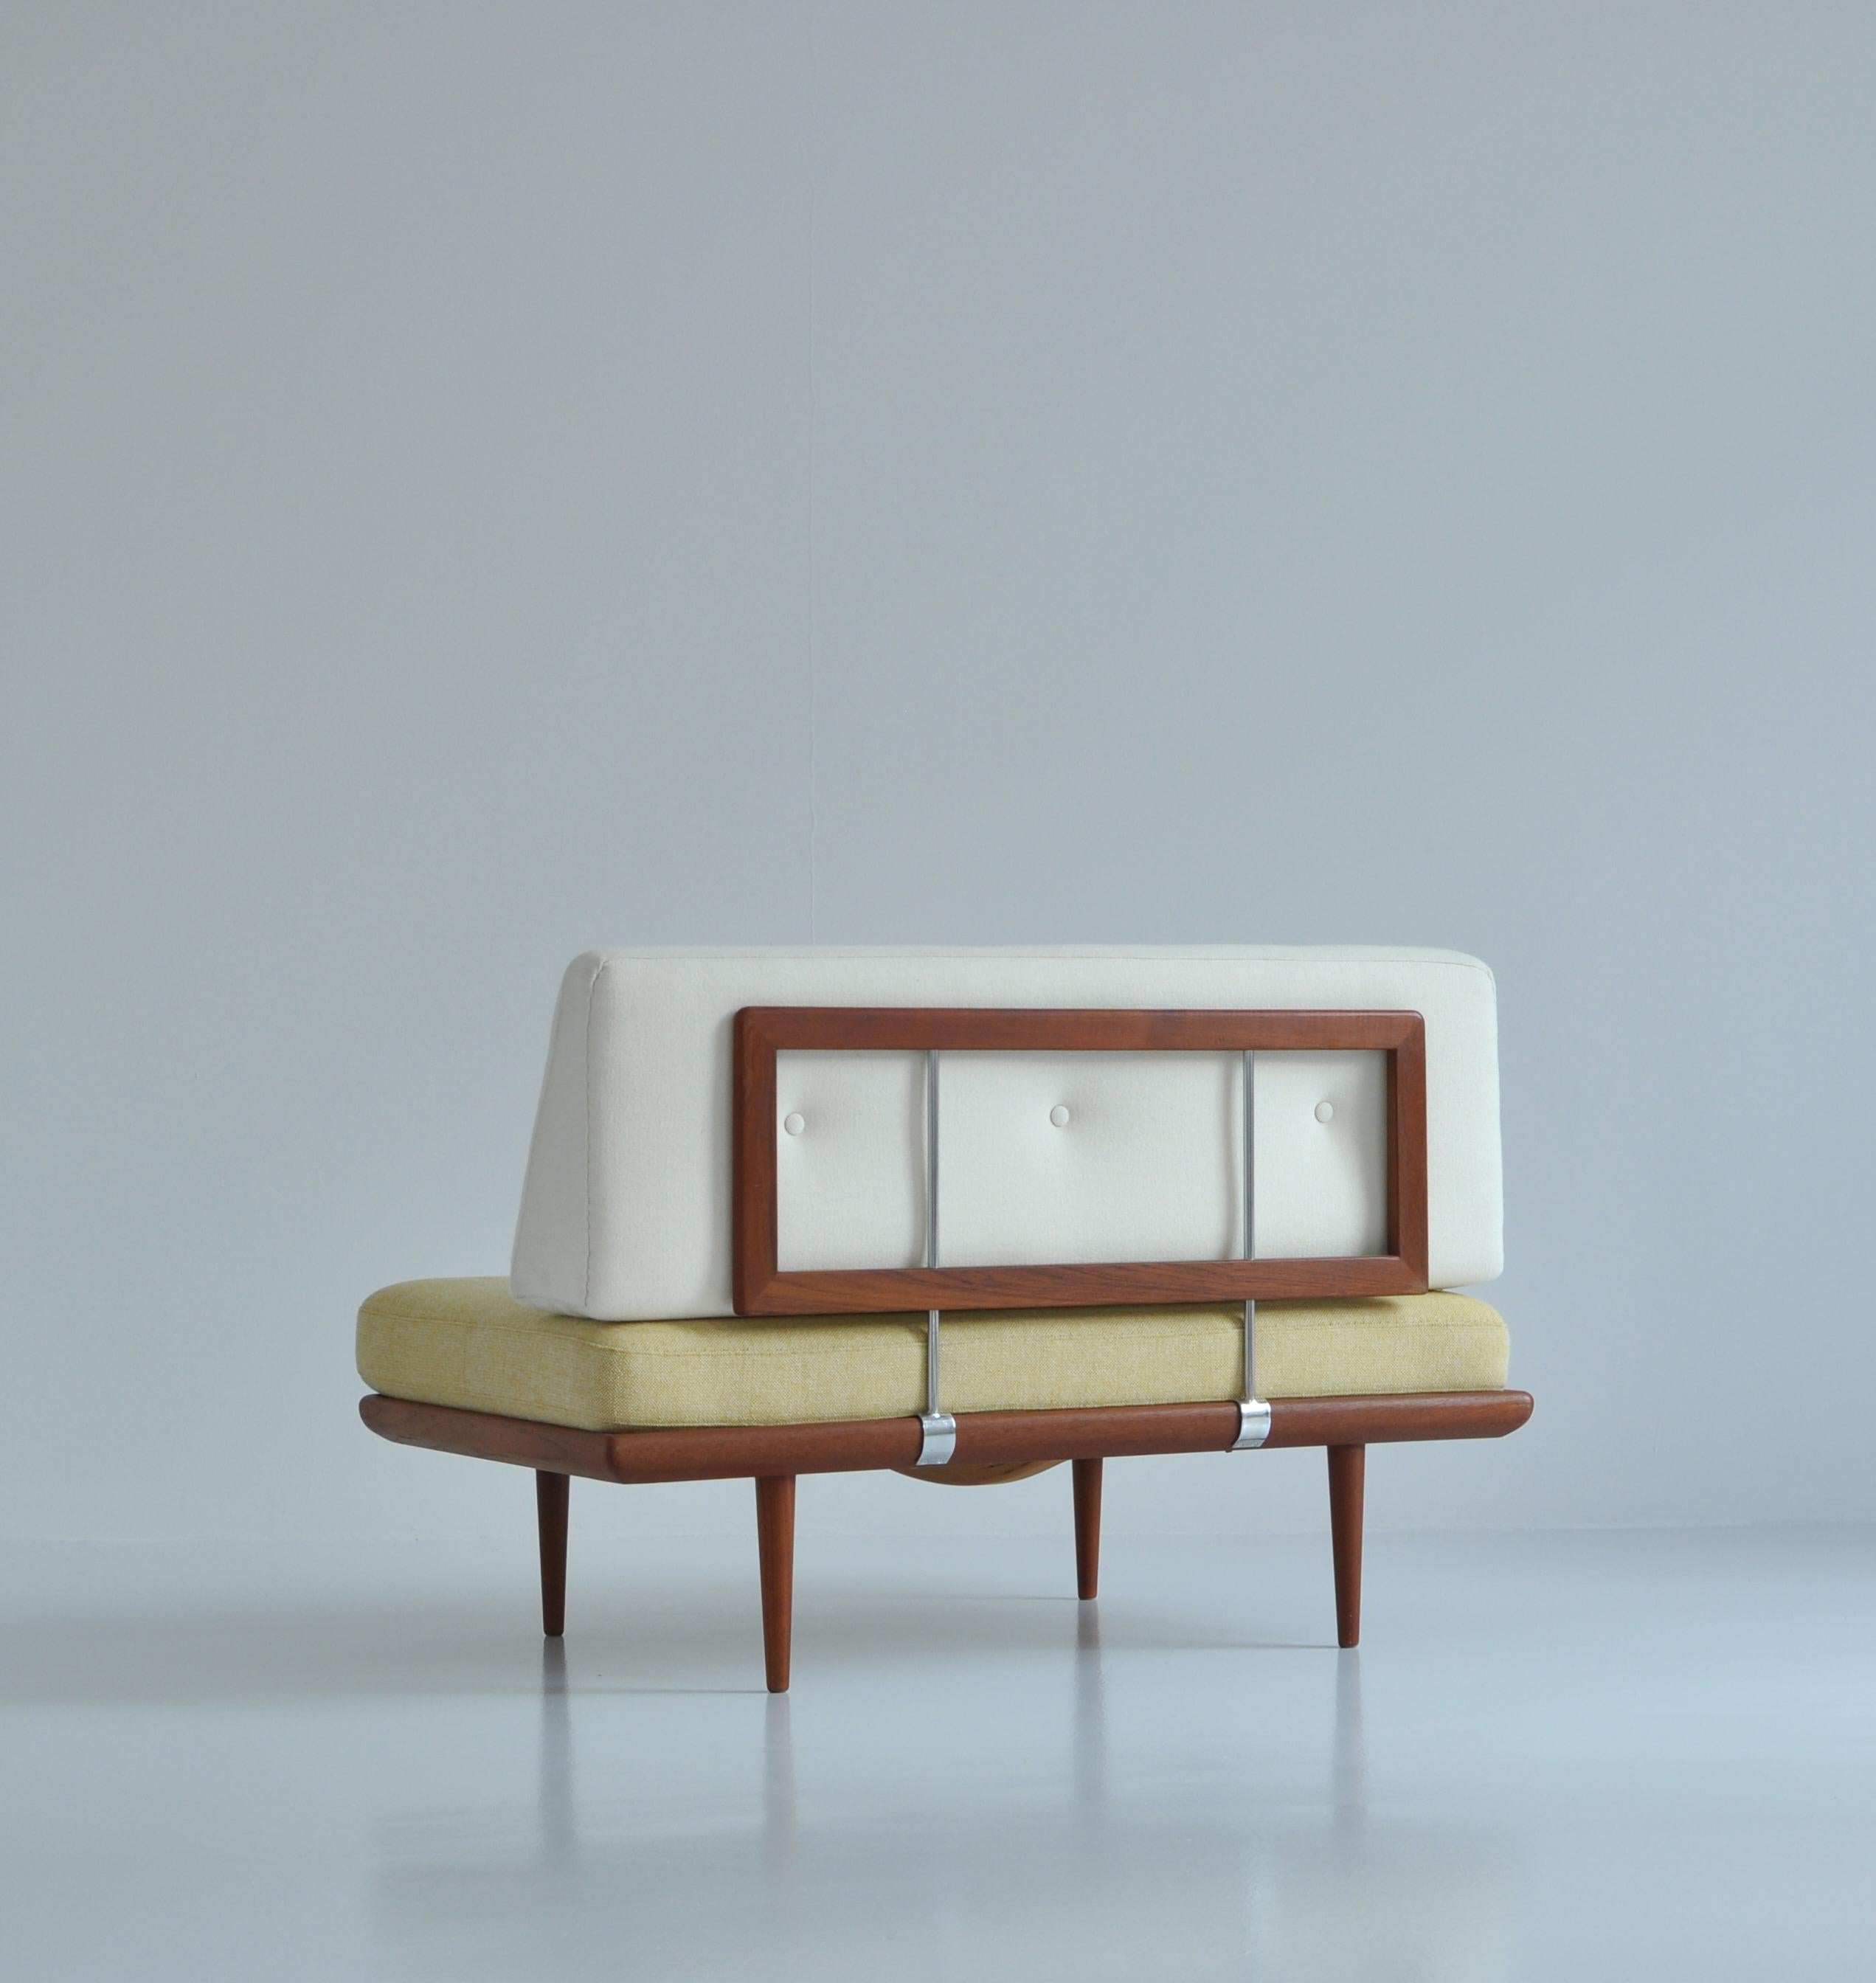 Daybed or sofa in solid Bangkok teakwood with newly upholstered seat and back in Kvadrat wool. Beautiful 1960s design by Peter Hvidt & Orla Molgaard Nielsen for 